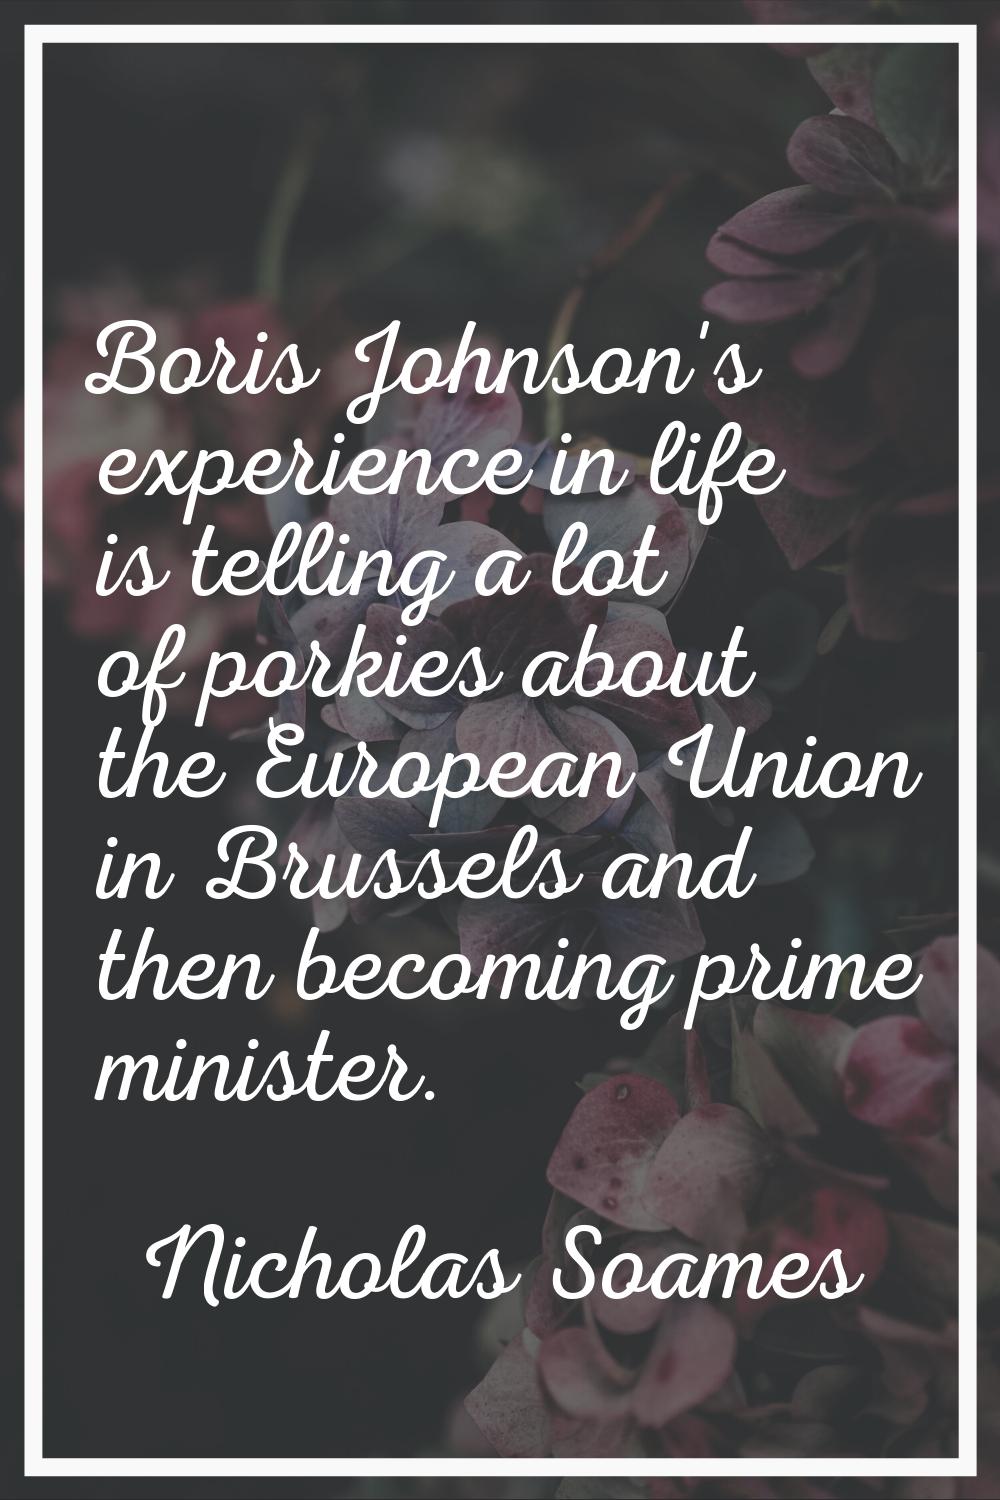 Boris Johnson's experience in life is telling a lot of porkies about the European Union in Brussels